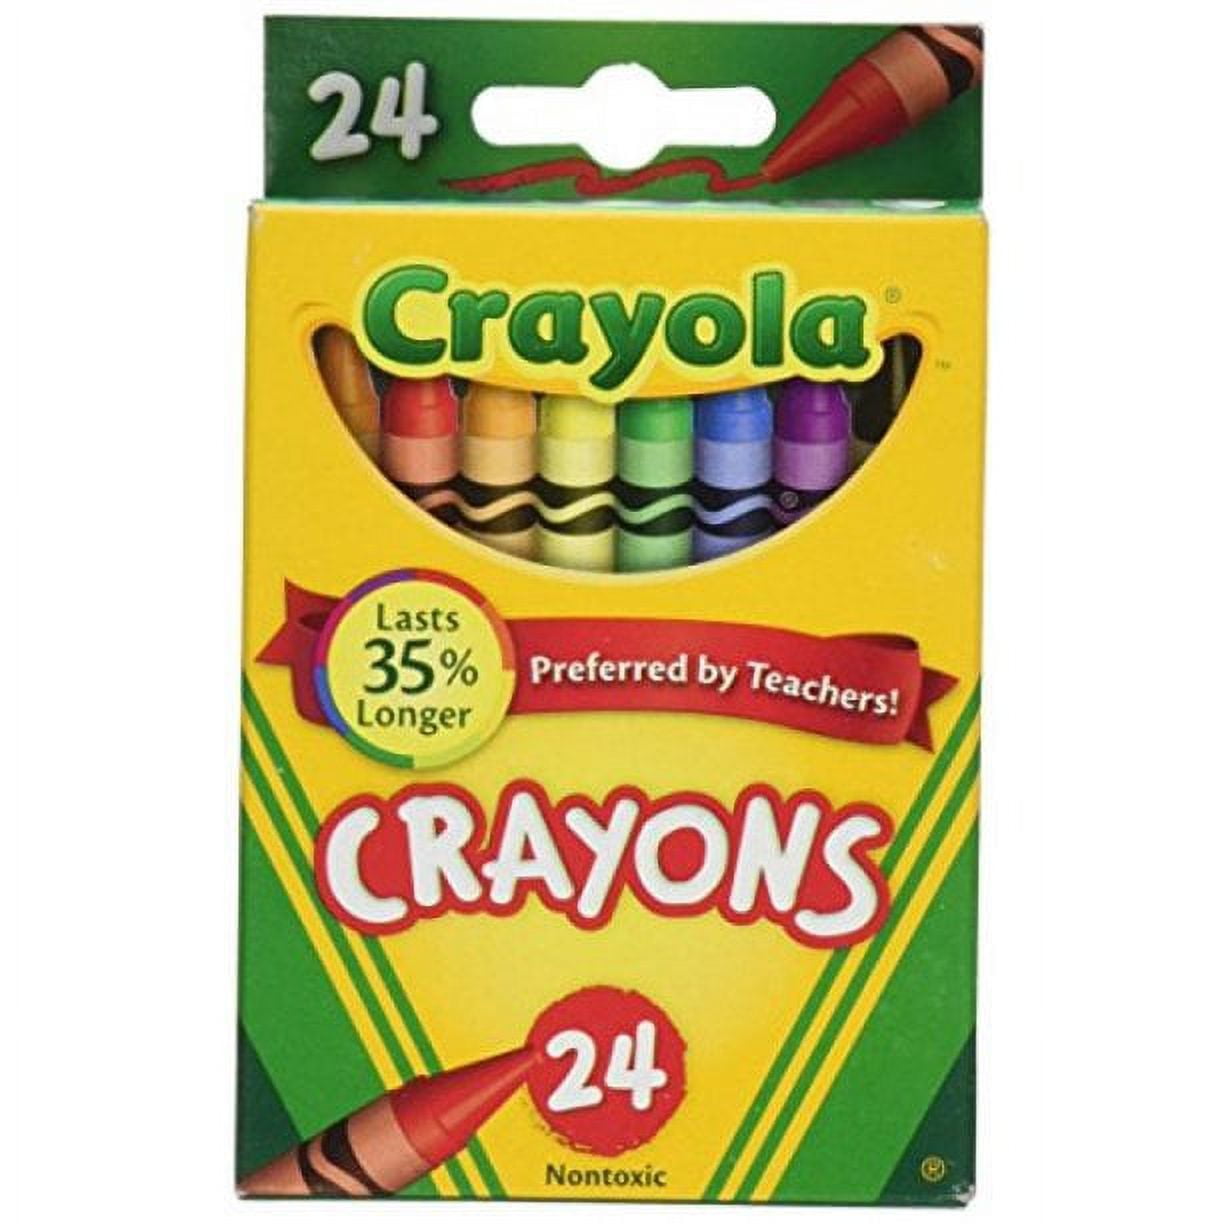 Color Swell Bulk Crayons 36 Packs of 24 Count Vibrant Color Wax Crayons  Teacher Quality Durable Classroom Pack for Kids Students Party Favors 